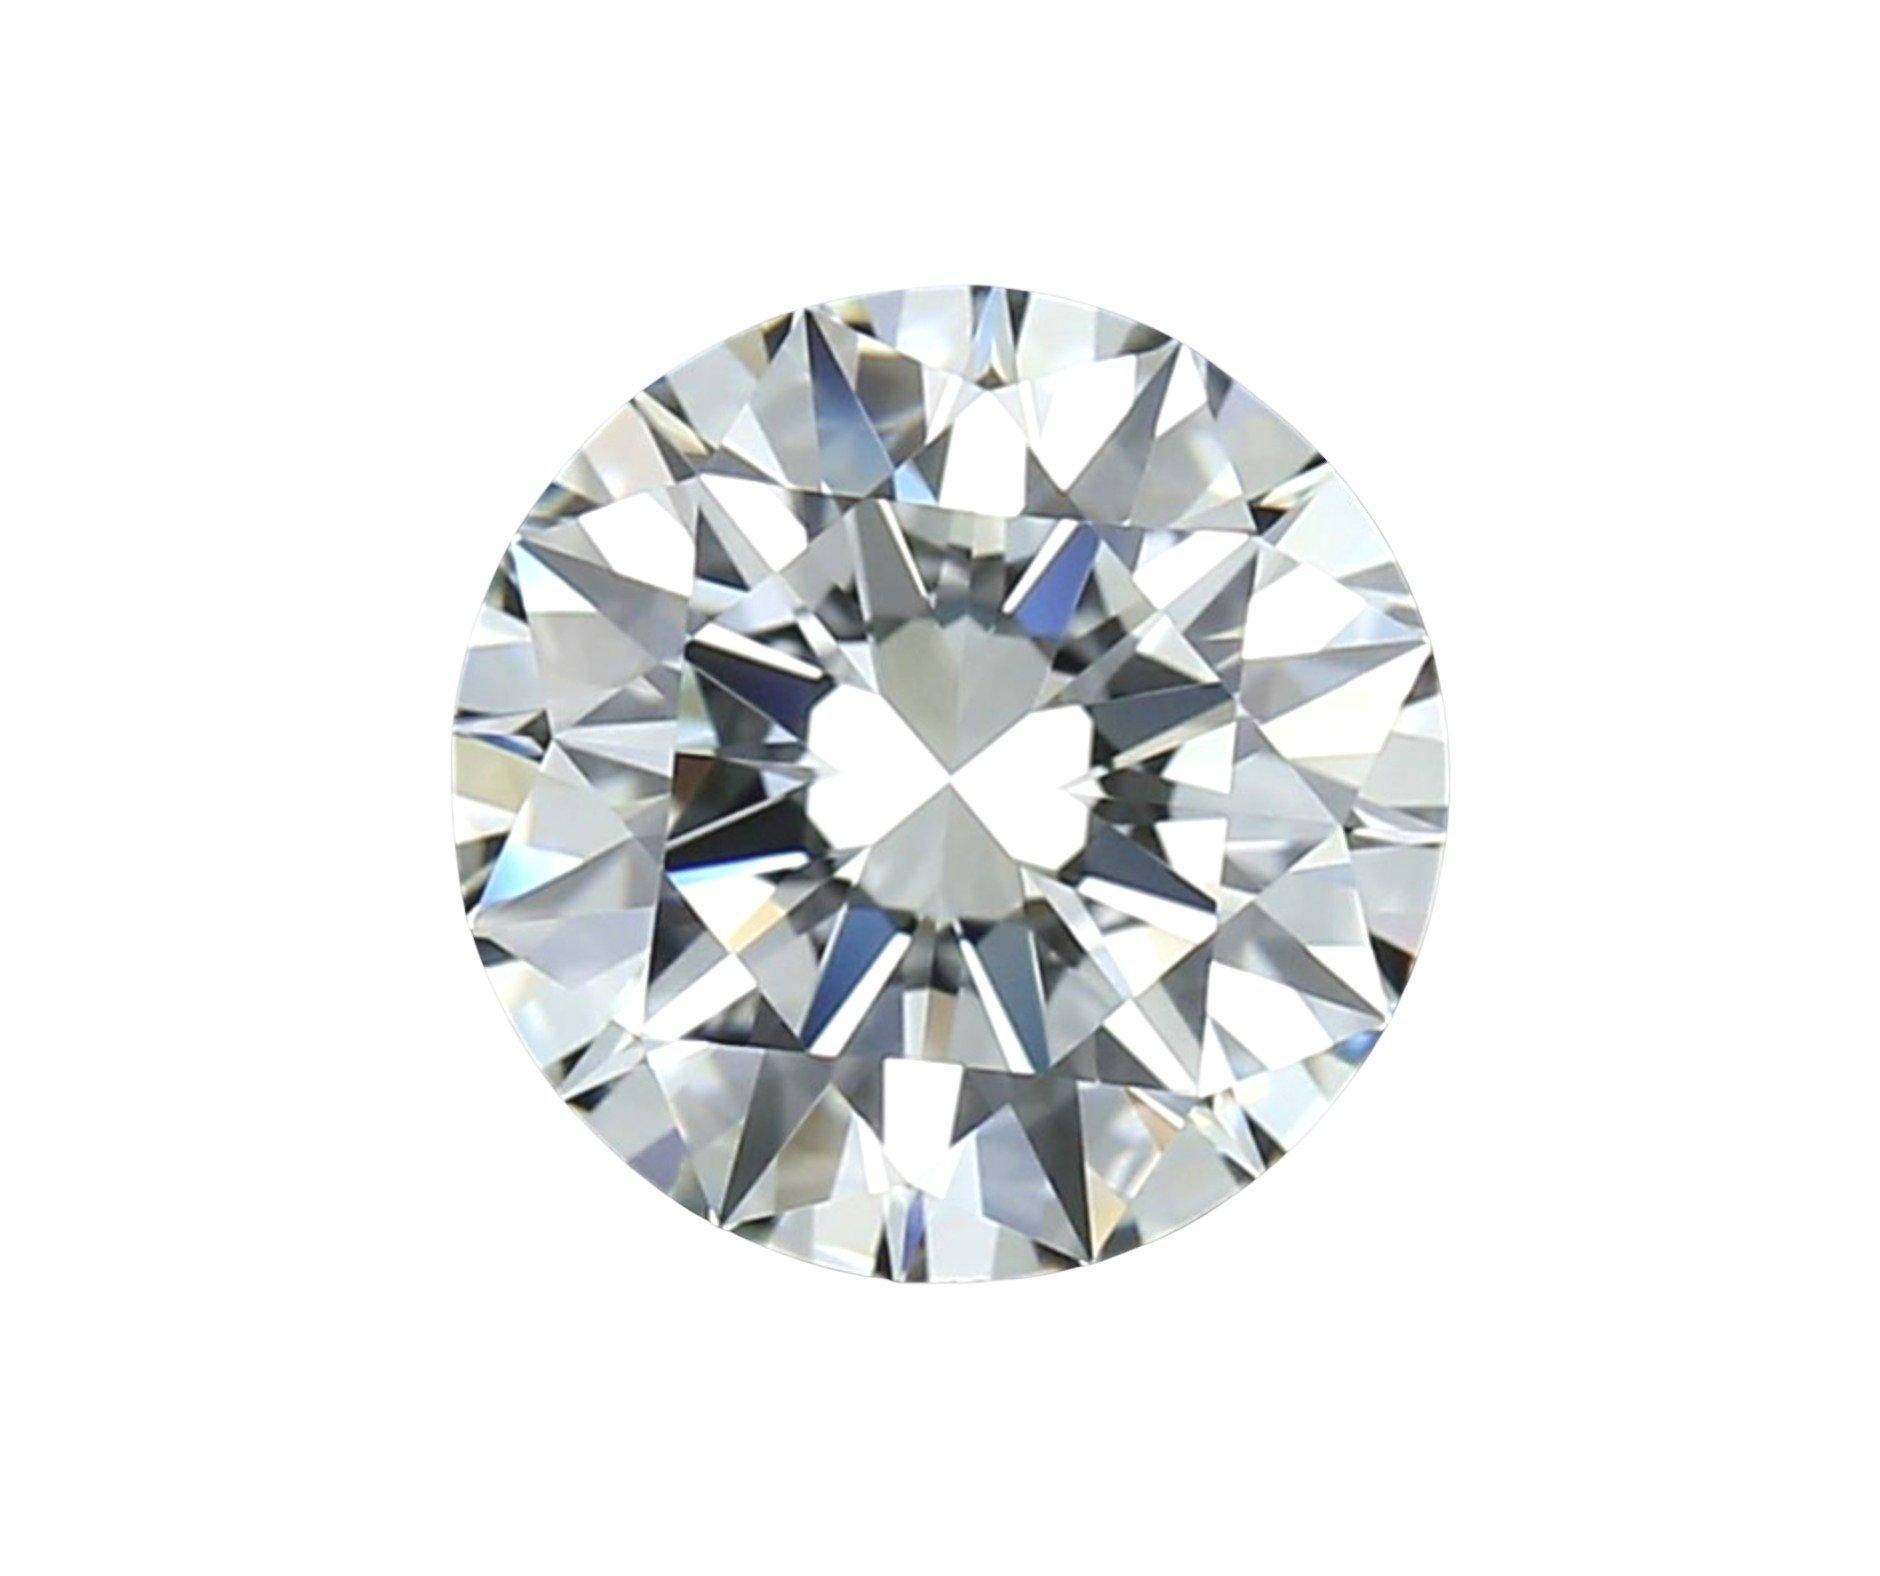 Gorgeous natural cut round brilliant ideal cut pair in a 1.85 carat H VVS1-IF with 3 excellent parameters .
This diamonds comes with GIA Certificate and laser inscription number.

SKU: C-DSPV-167352-5 & C-DSPV-167352-19
GIA 6451128982 & 2457165453